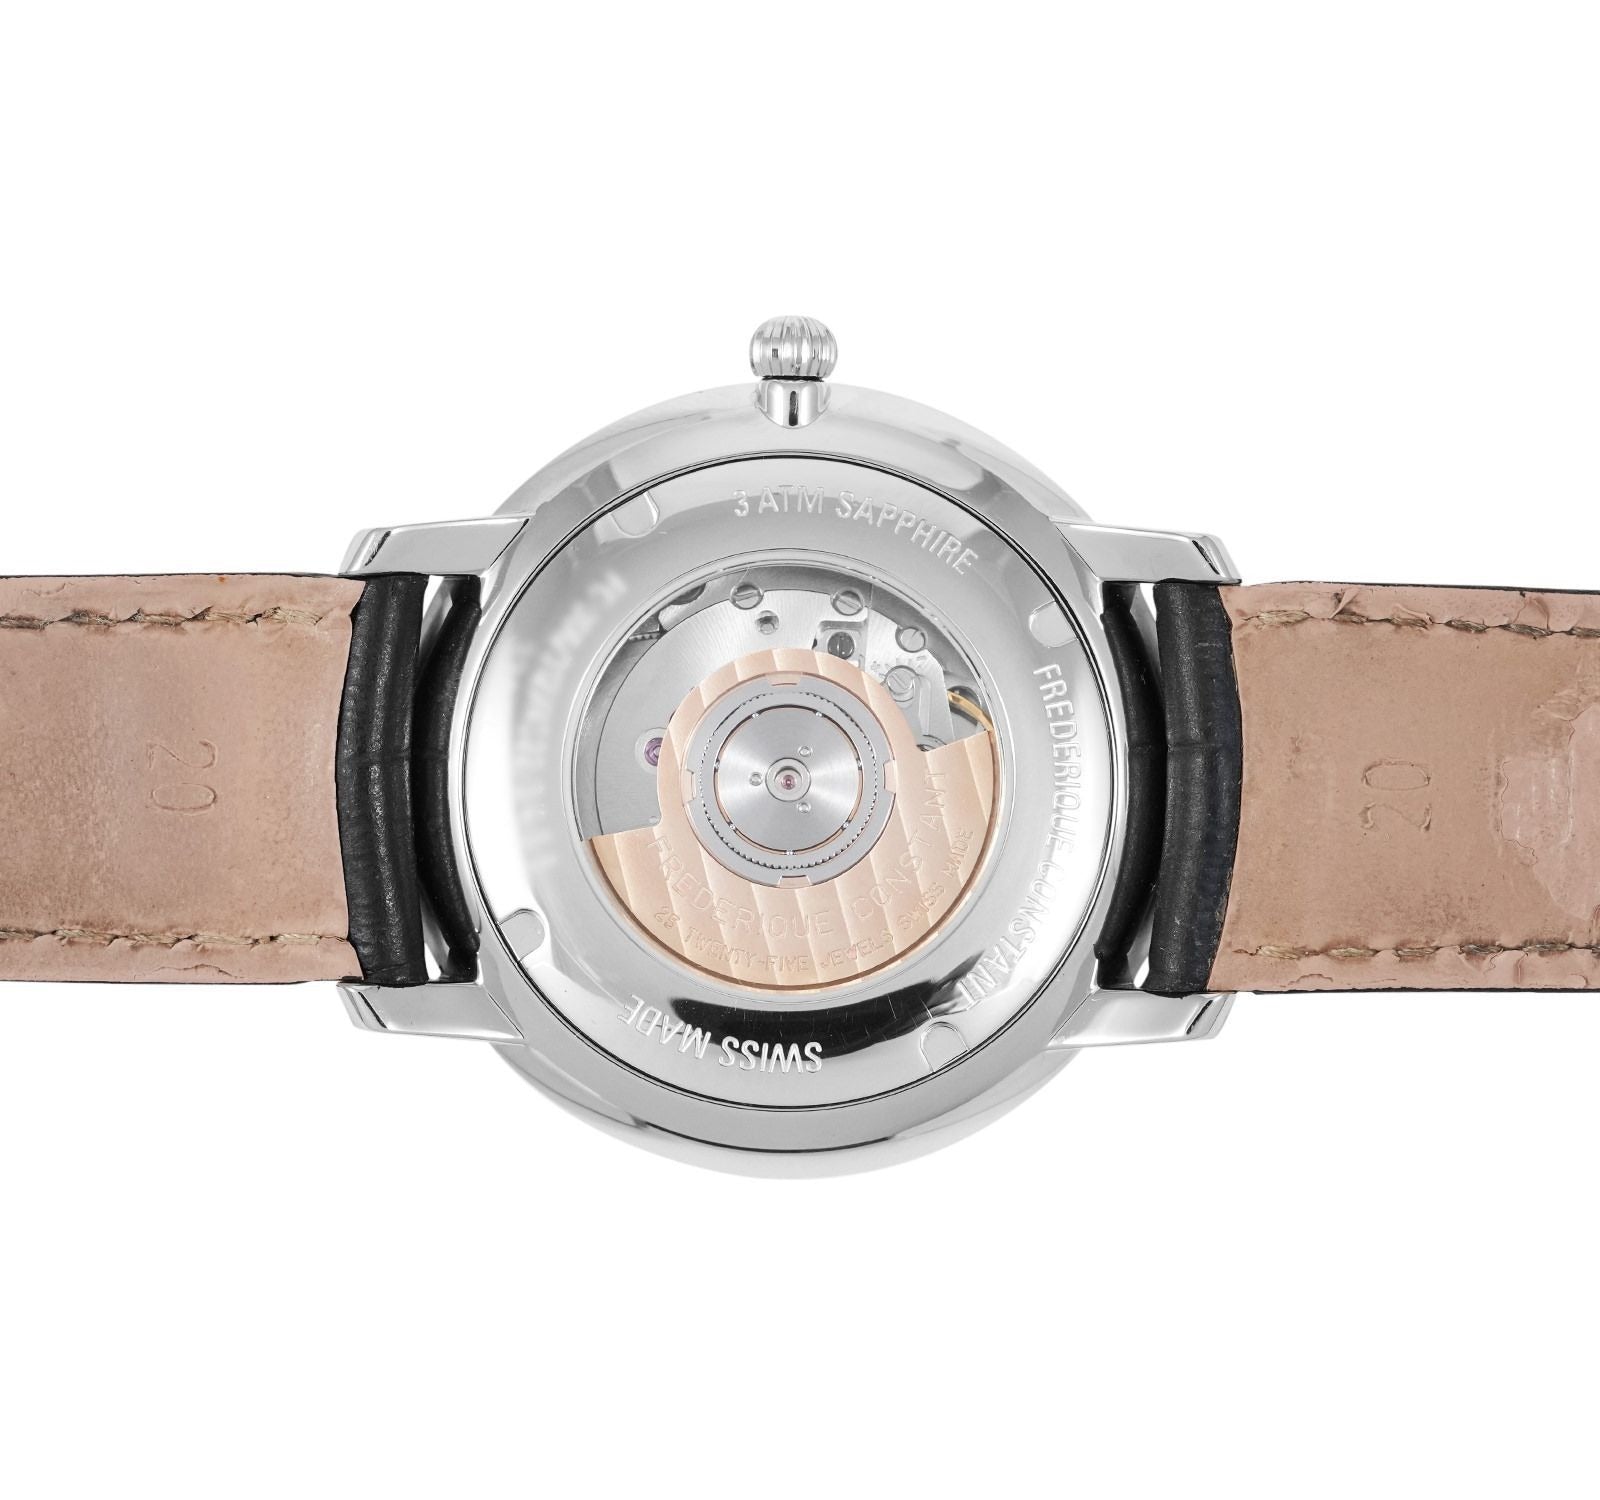 Introducing Frederique Constant's Classic Power Reserve Big Date Manufacture